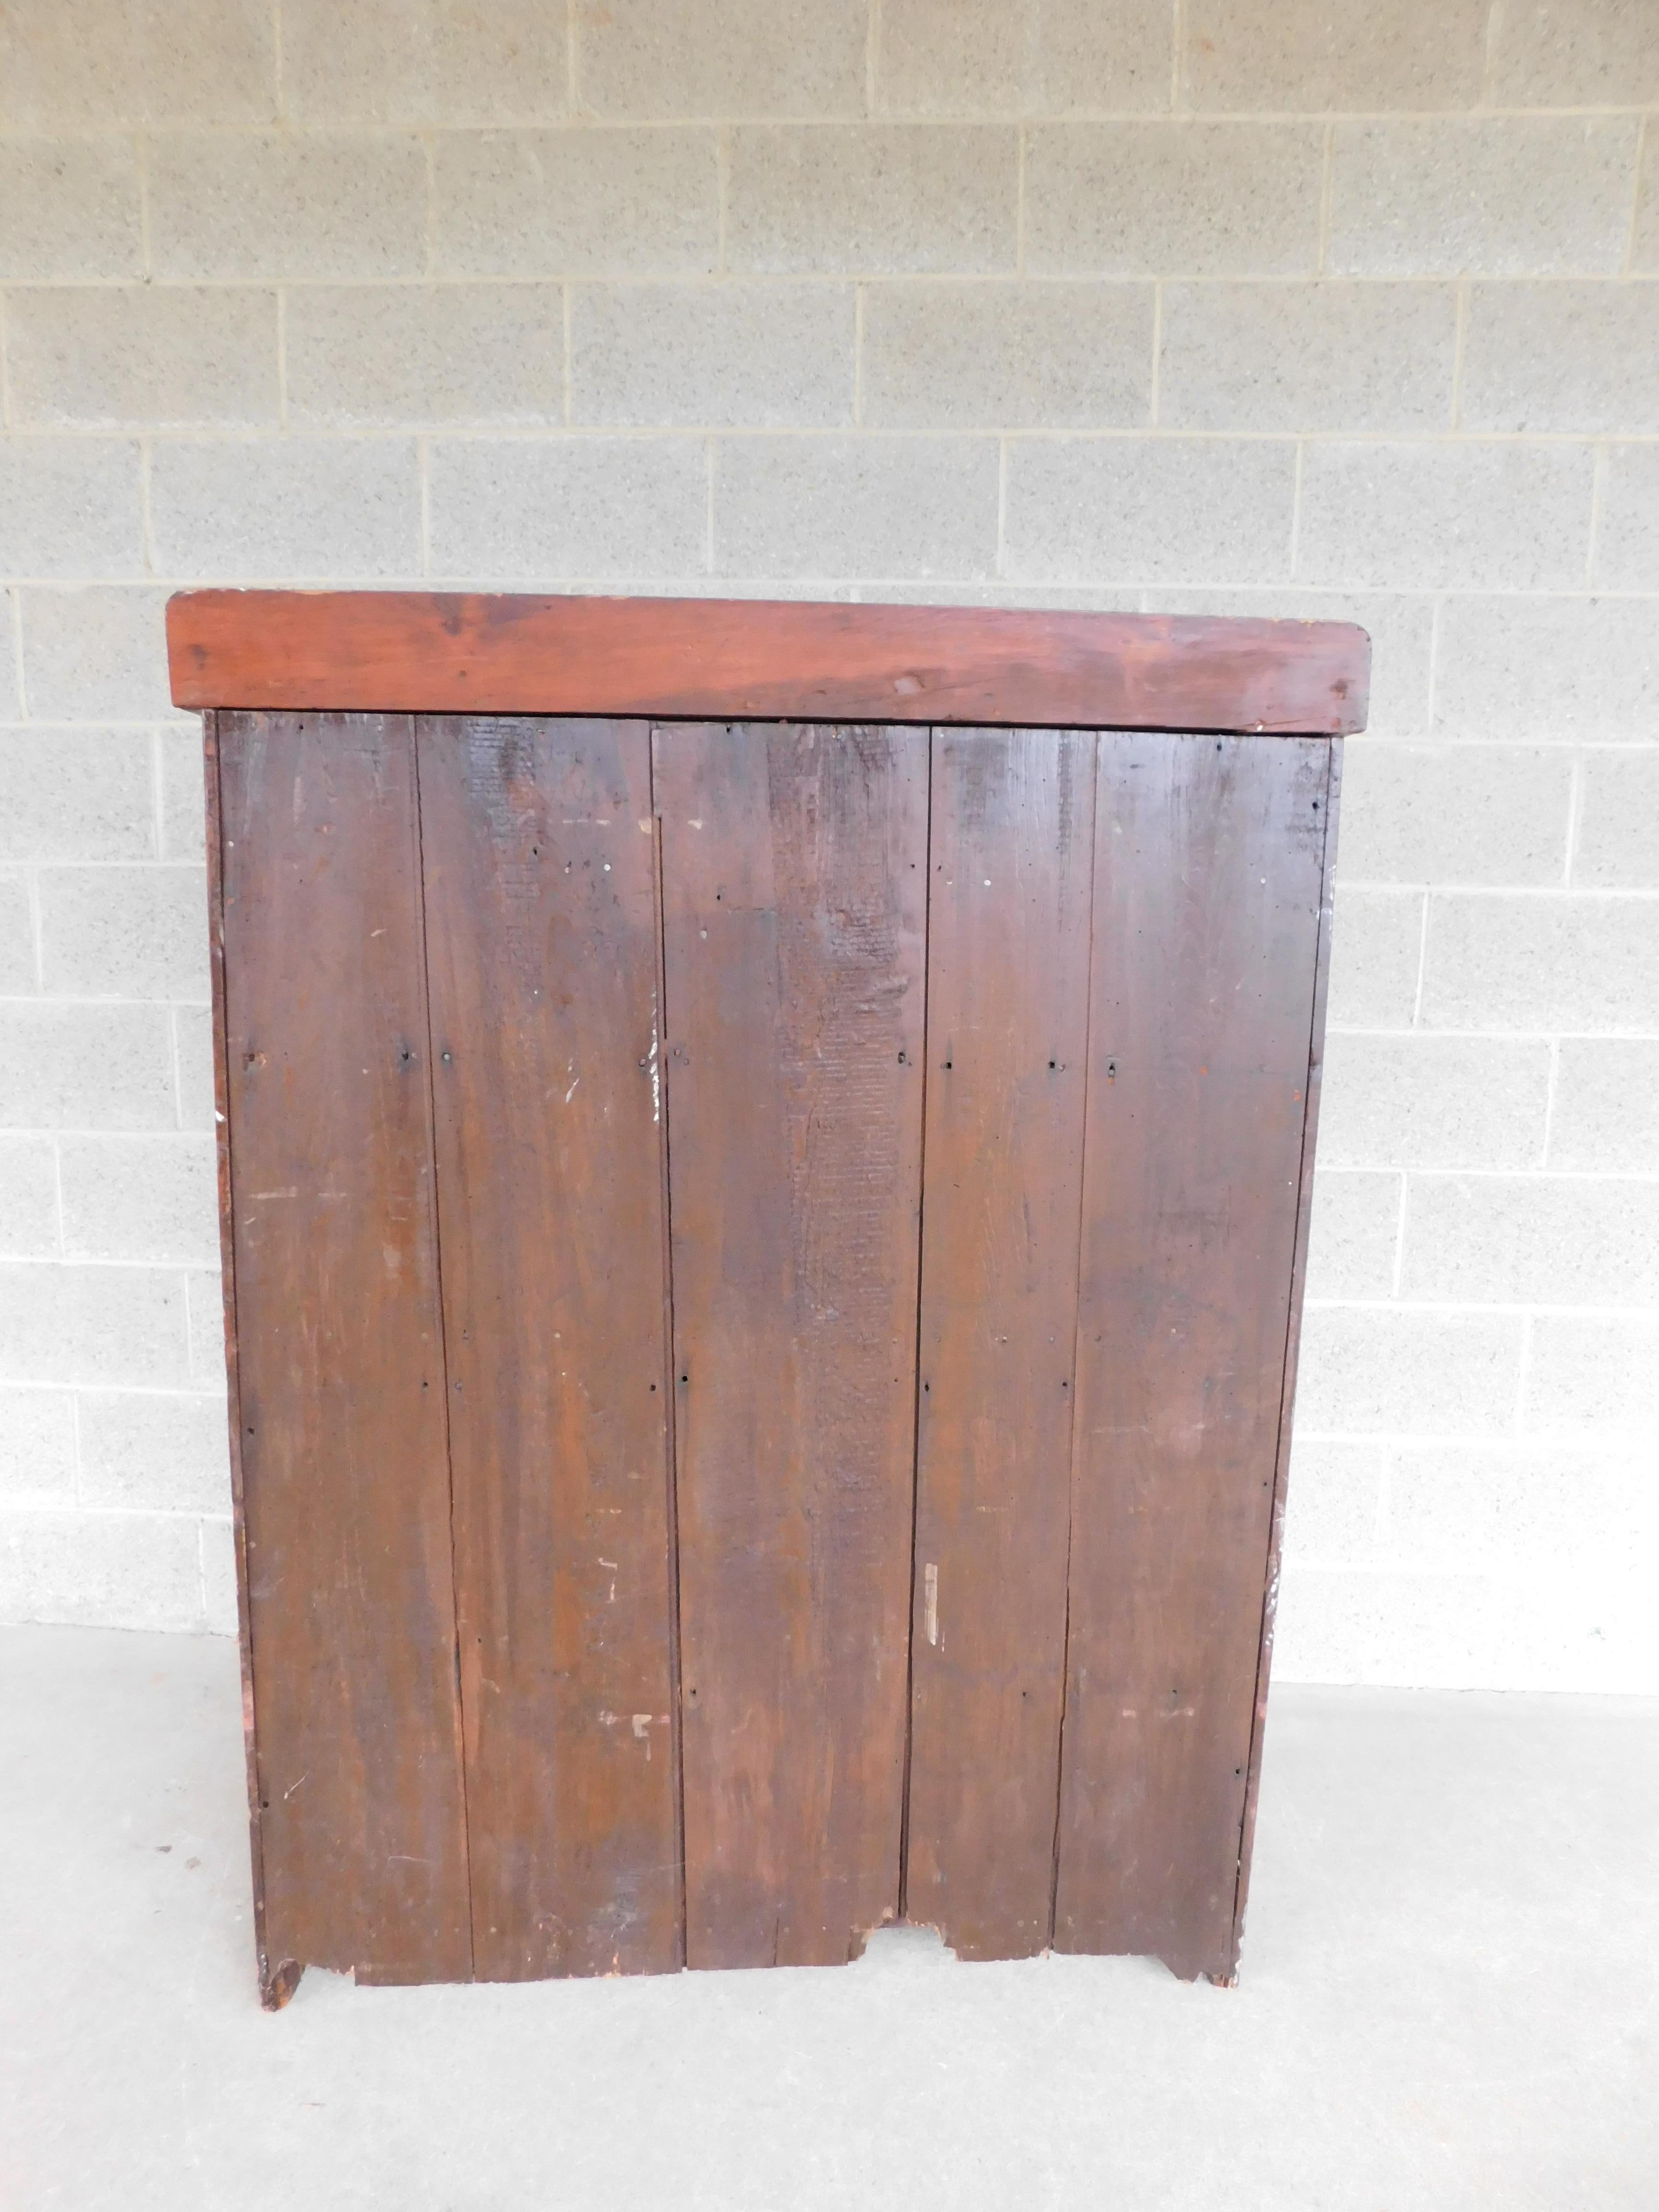 Antique Primitive Cherry Dry Sink

Circa Mid 19th Century, Cherry Wood with 3 Storage Drawers across the Top below with a Mid Level Shelf, and Dry Sink area. Lower Storage behind the Doors, with one Fixed Shelf.

Good Antique Sturdy